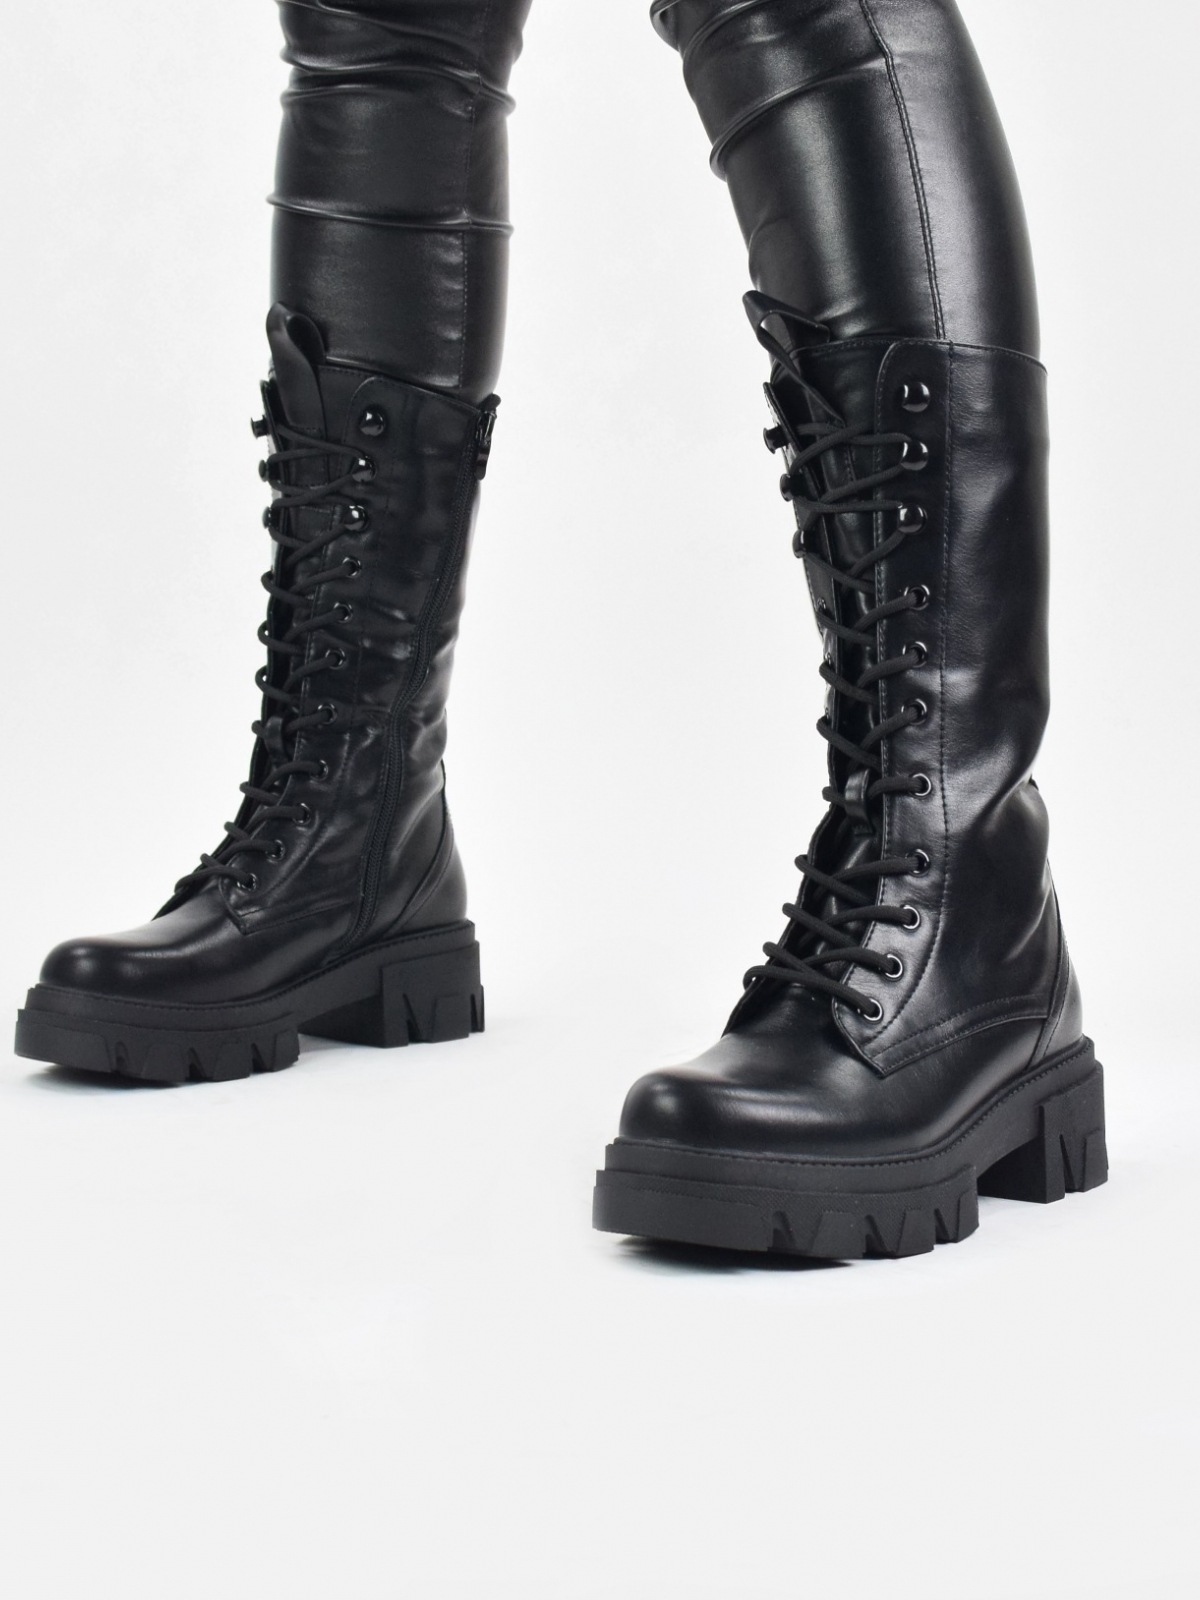 Lace up round toe mid calf ankle boots in black